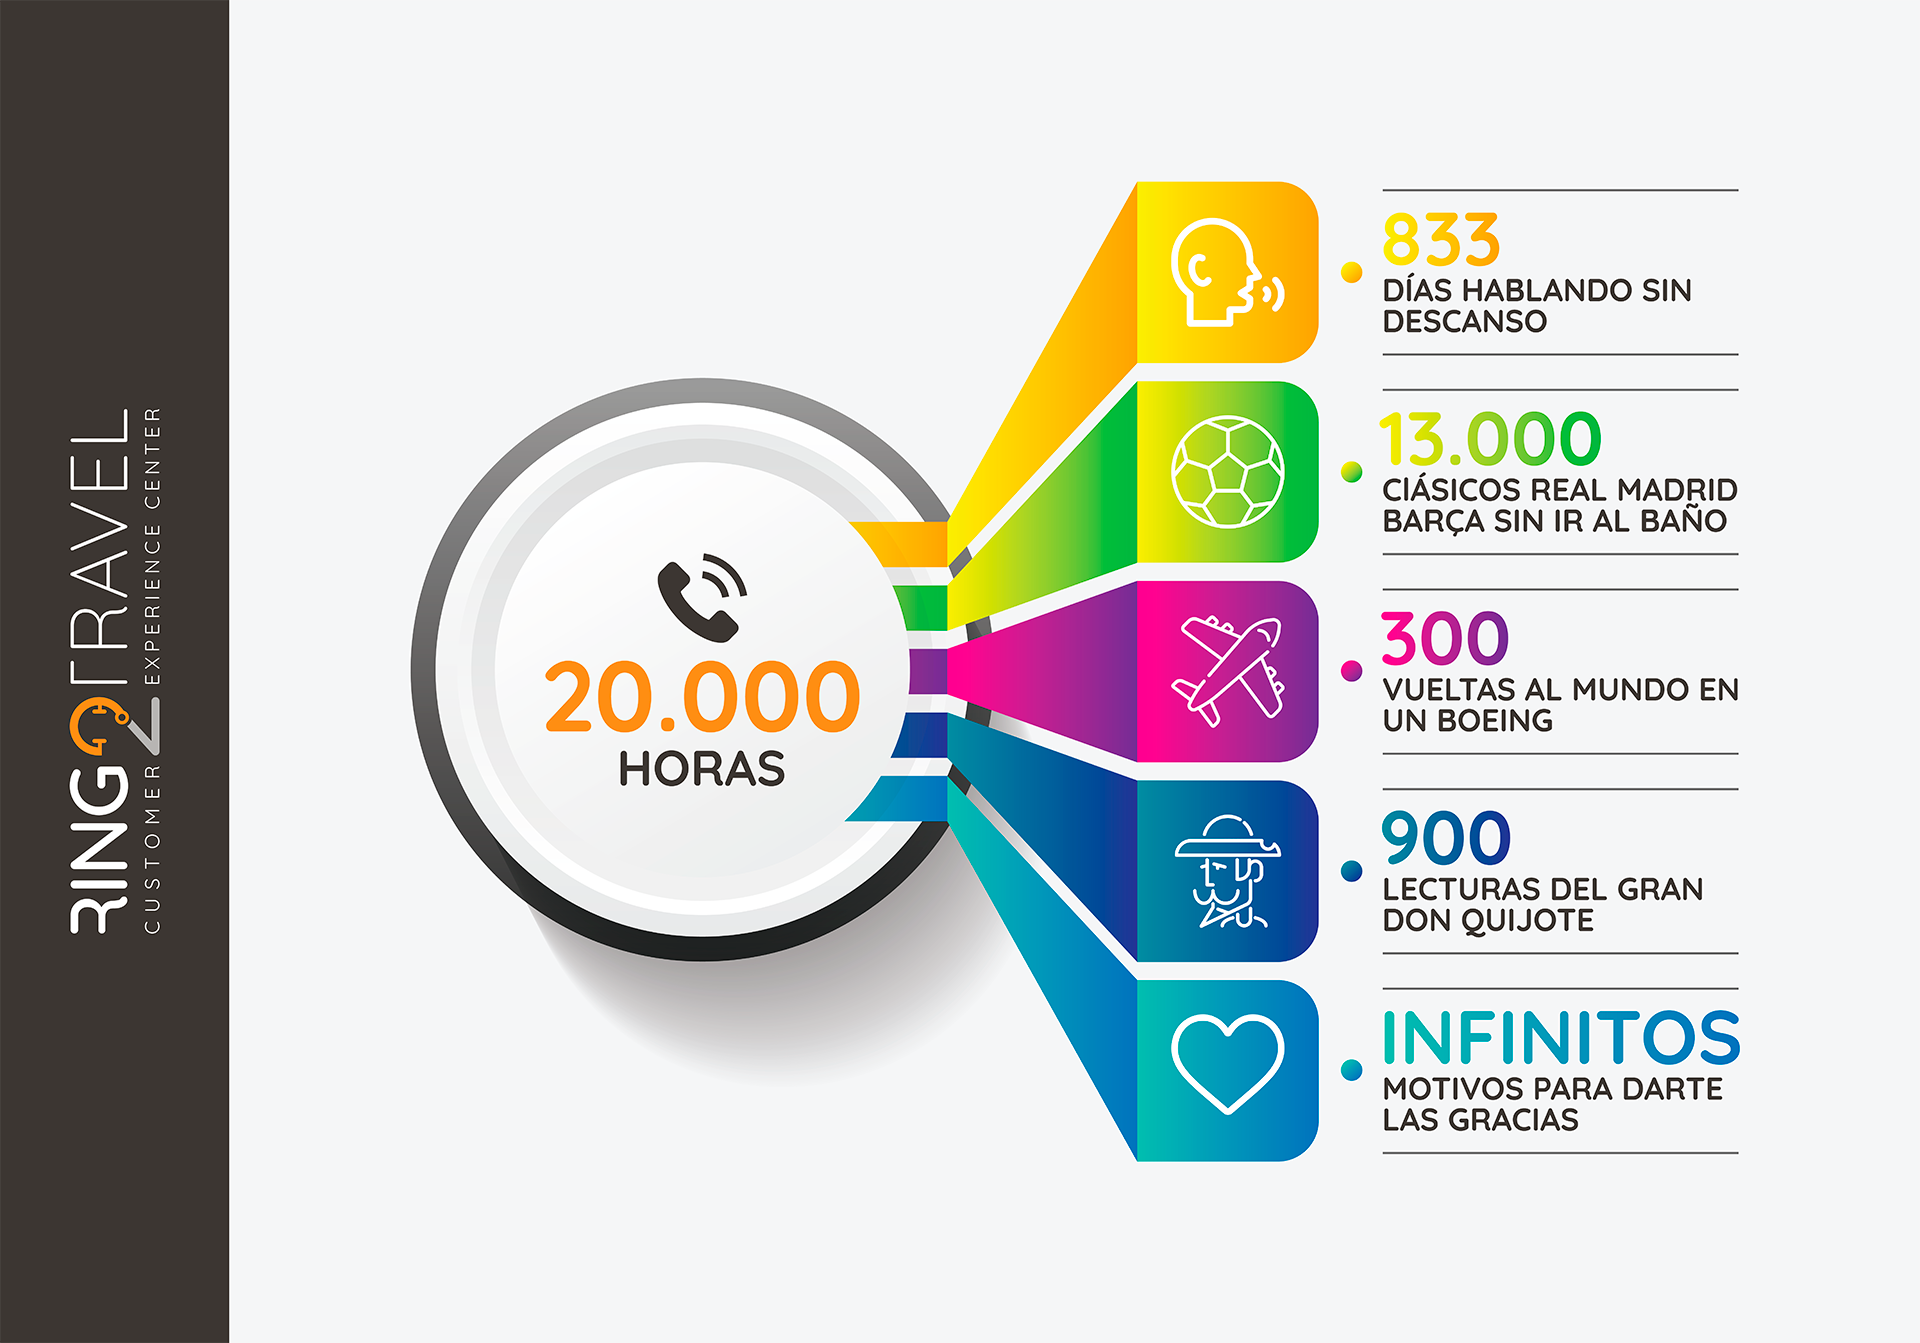 Ring2Travel reaches 20,000 hours of telephone service and loyalty